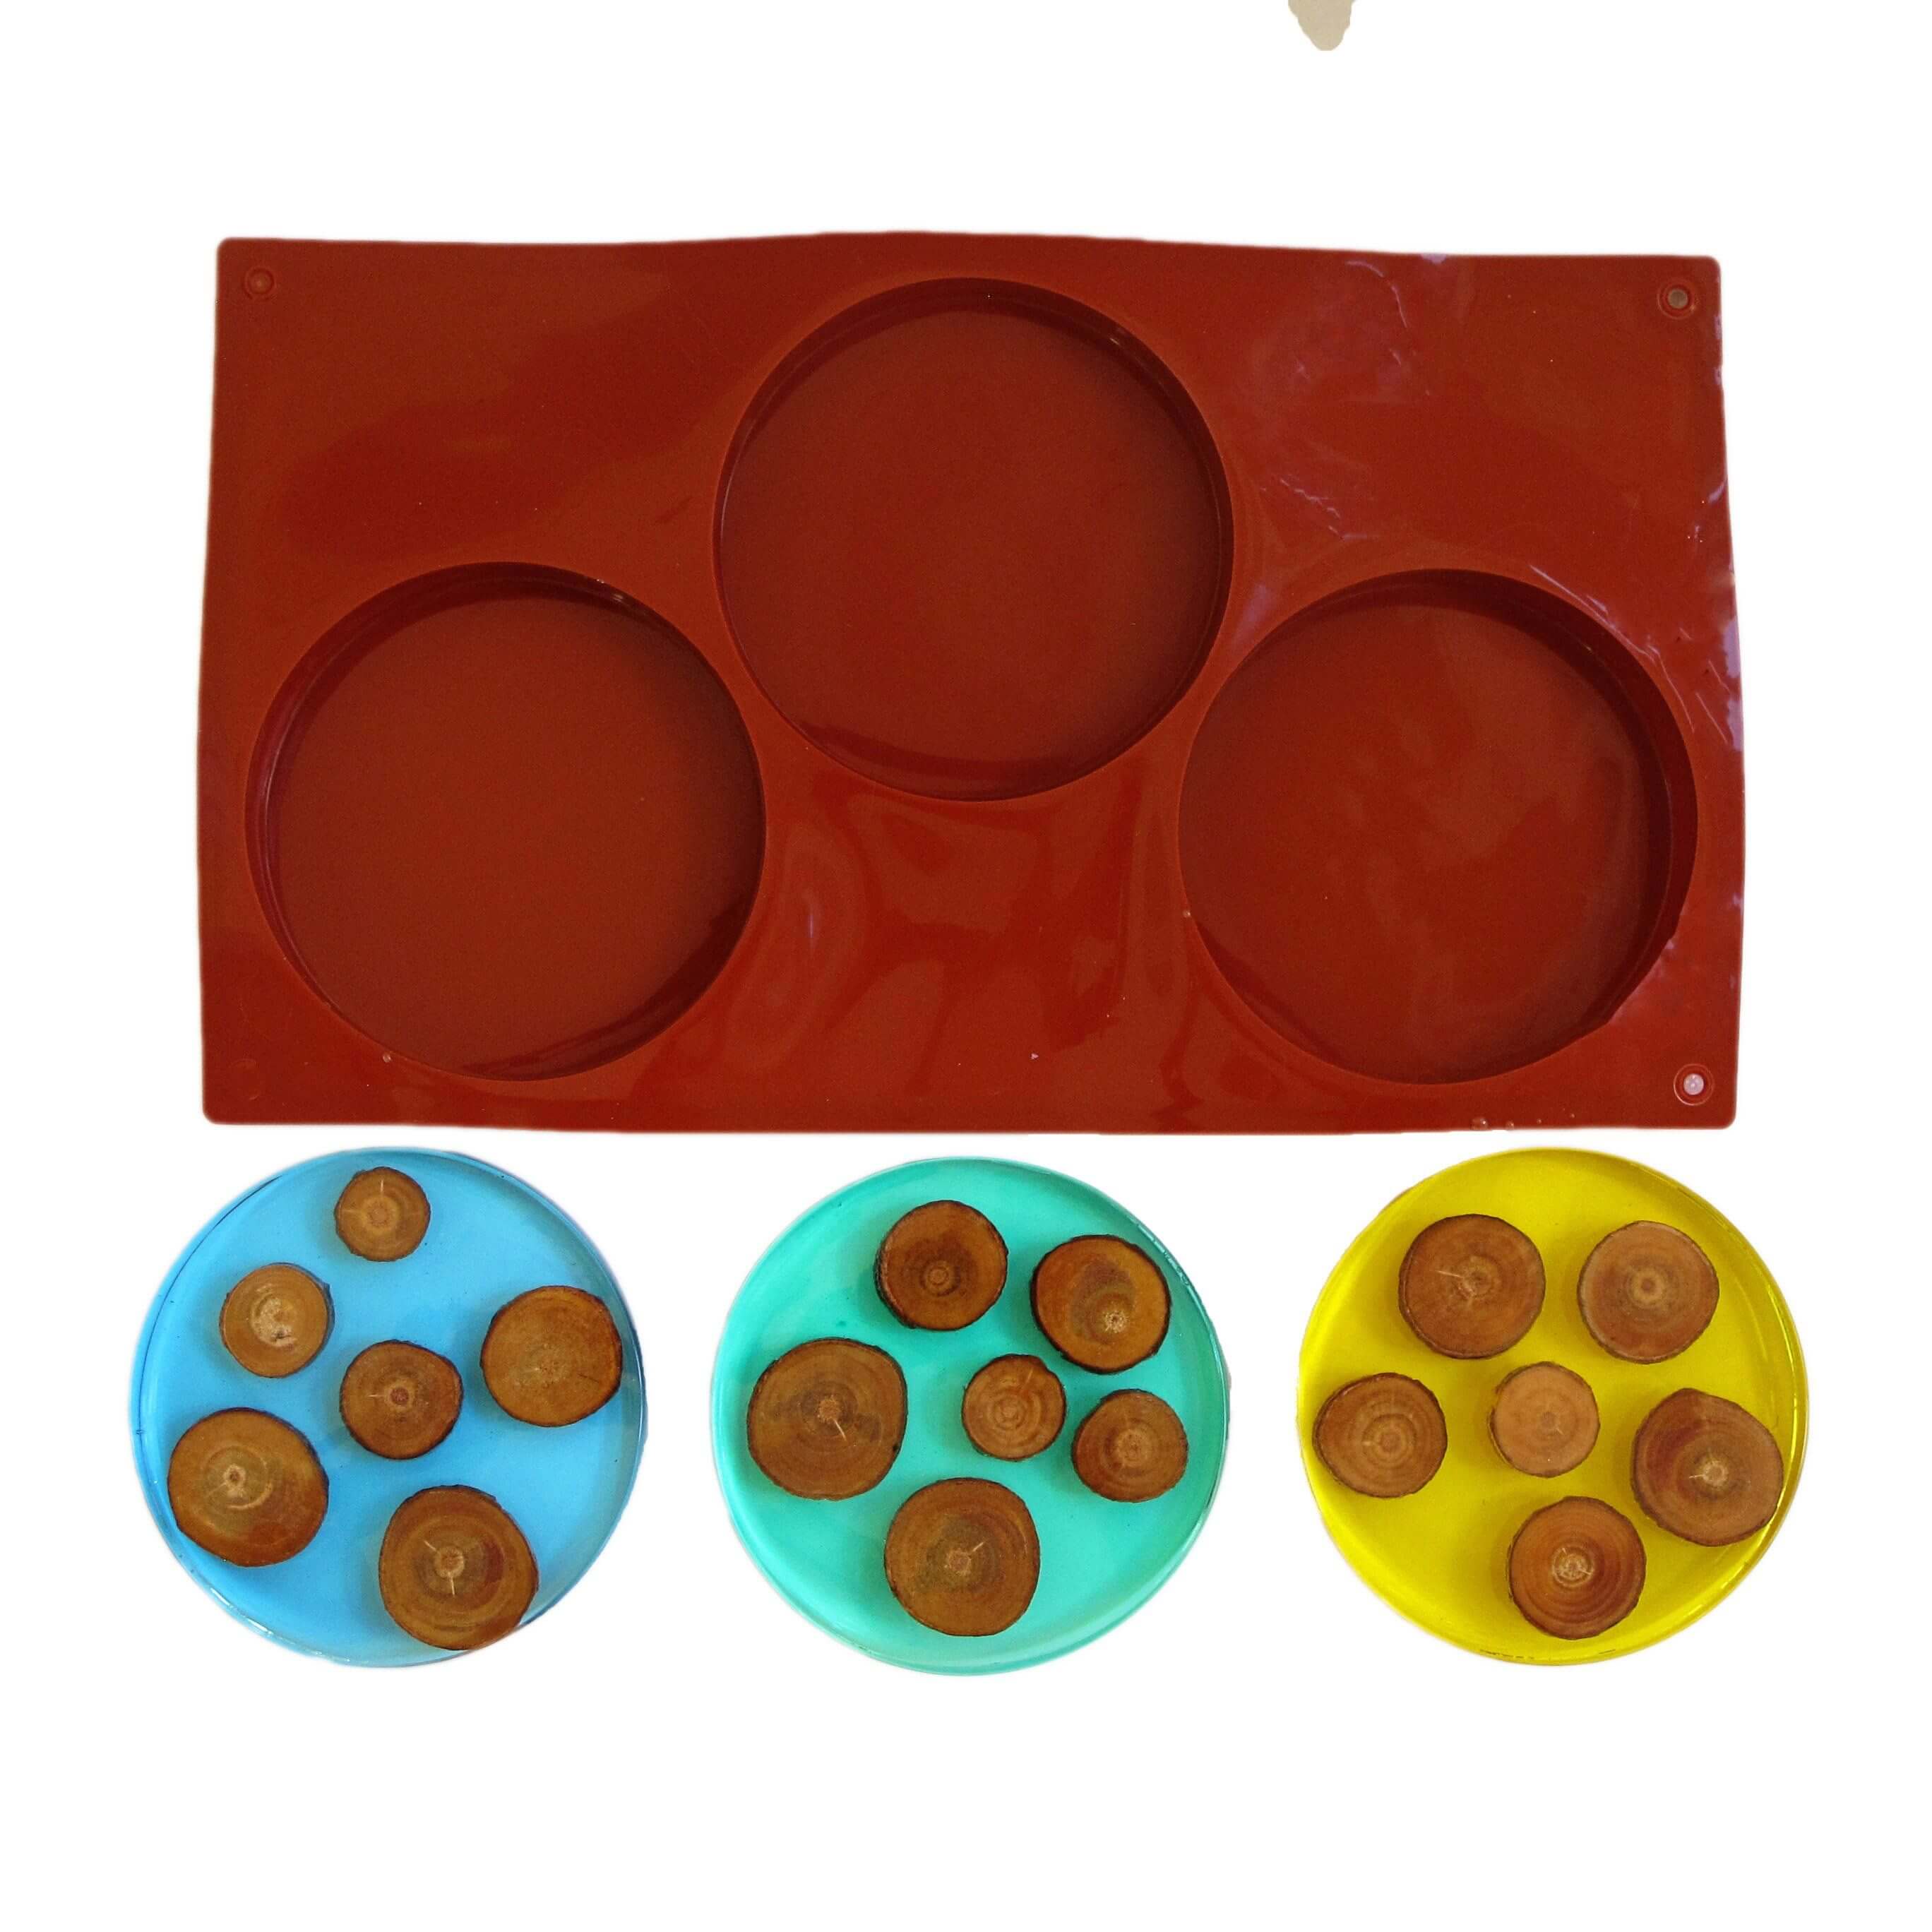 Silicone Molds For Resin Art: Resin Art Molds: Free US Delivery